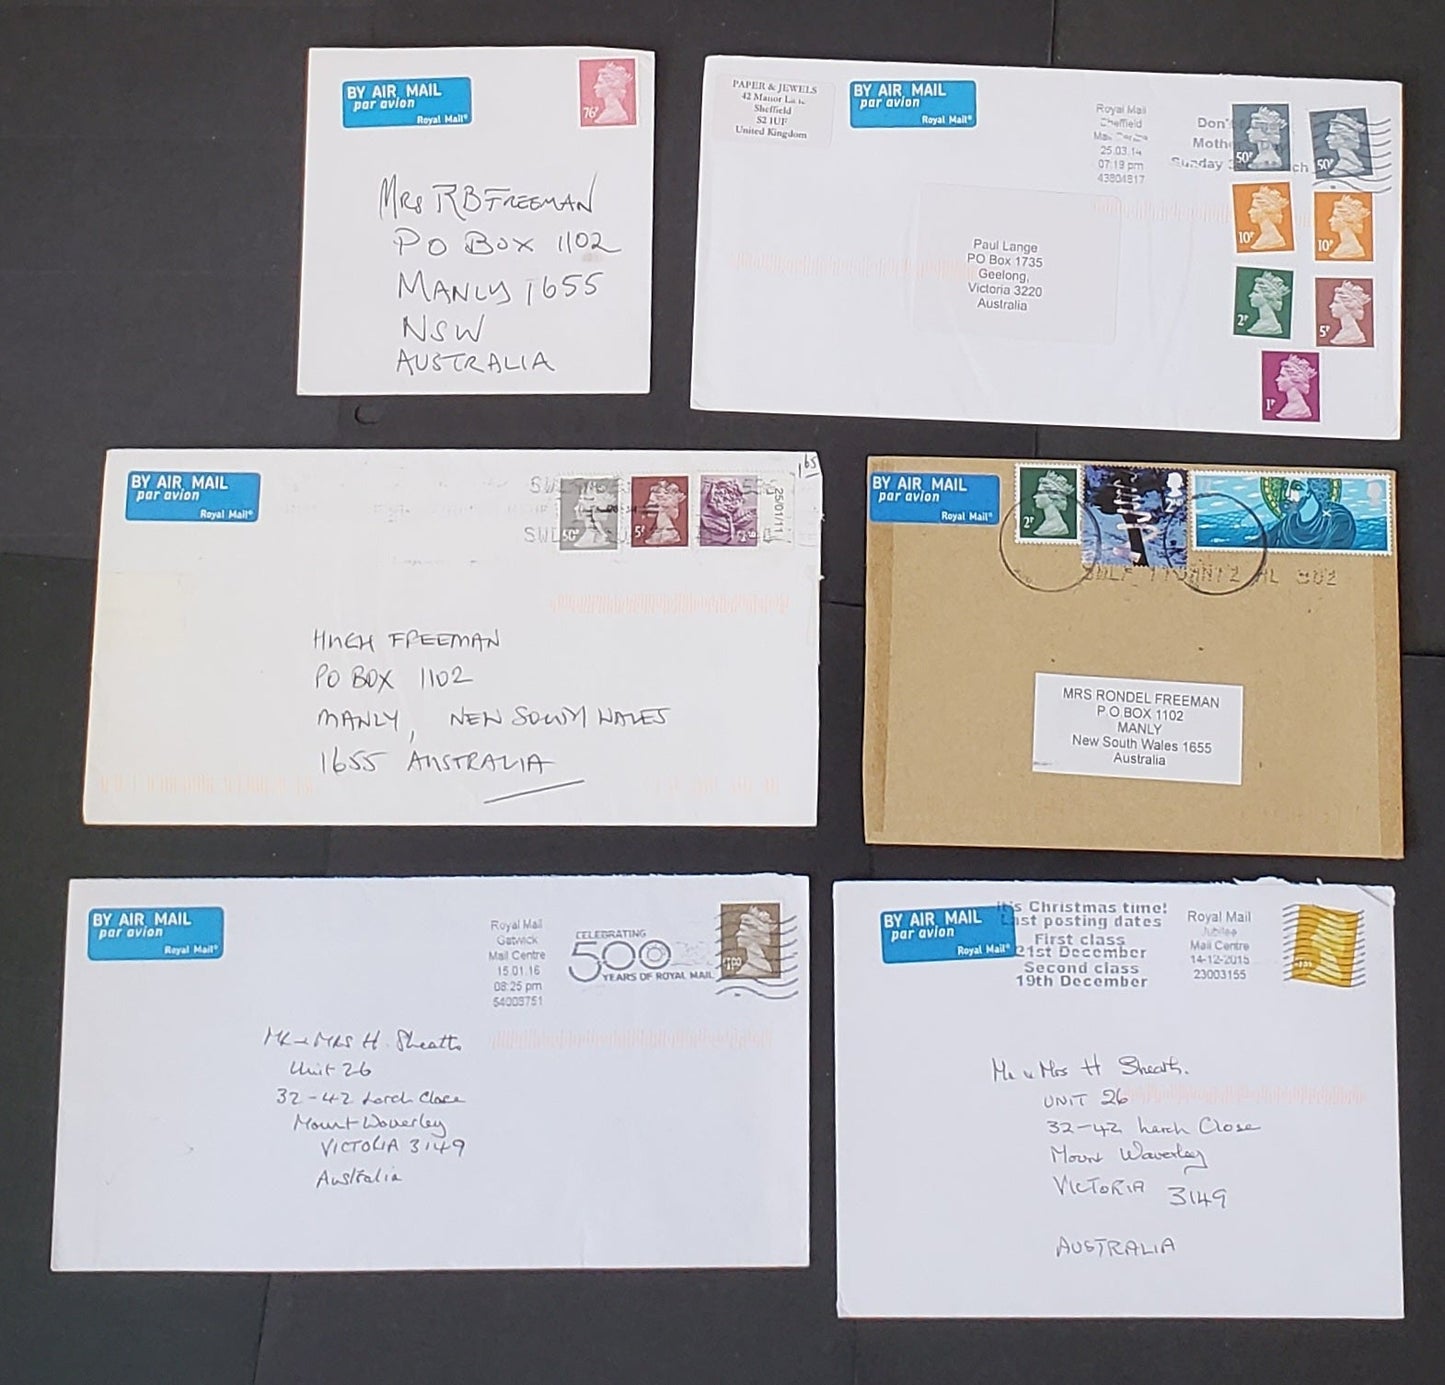 Lot 358 Great Britain 2014-2015 Decimal Machin Covers, A Selection of 6 Different, With Elliptical Perf Security Machins, Values Between 5p and 1.33 GBP, All Sent to Australia, Net. Est. $12